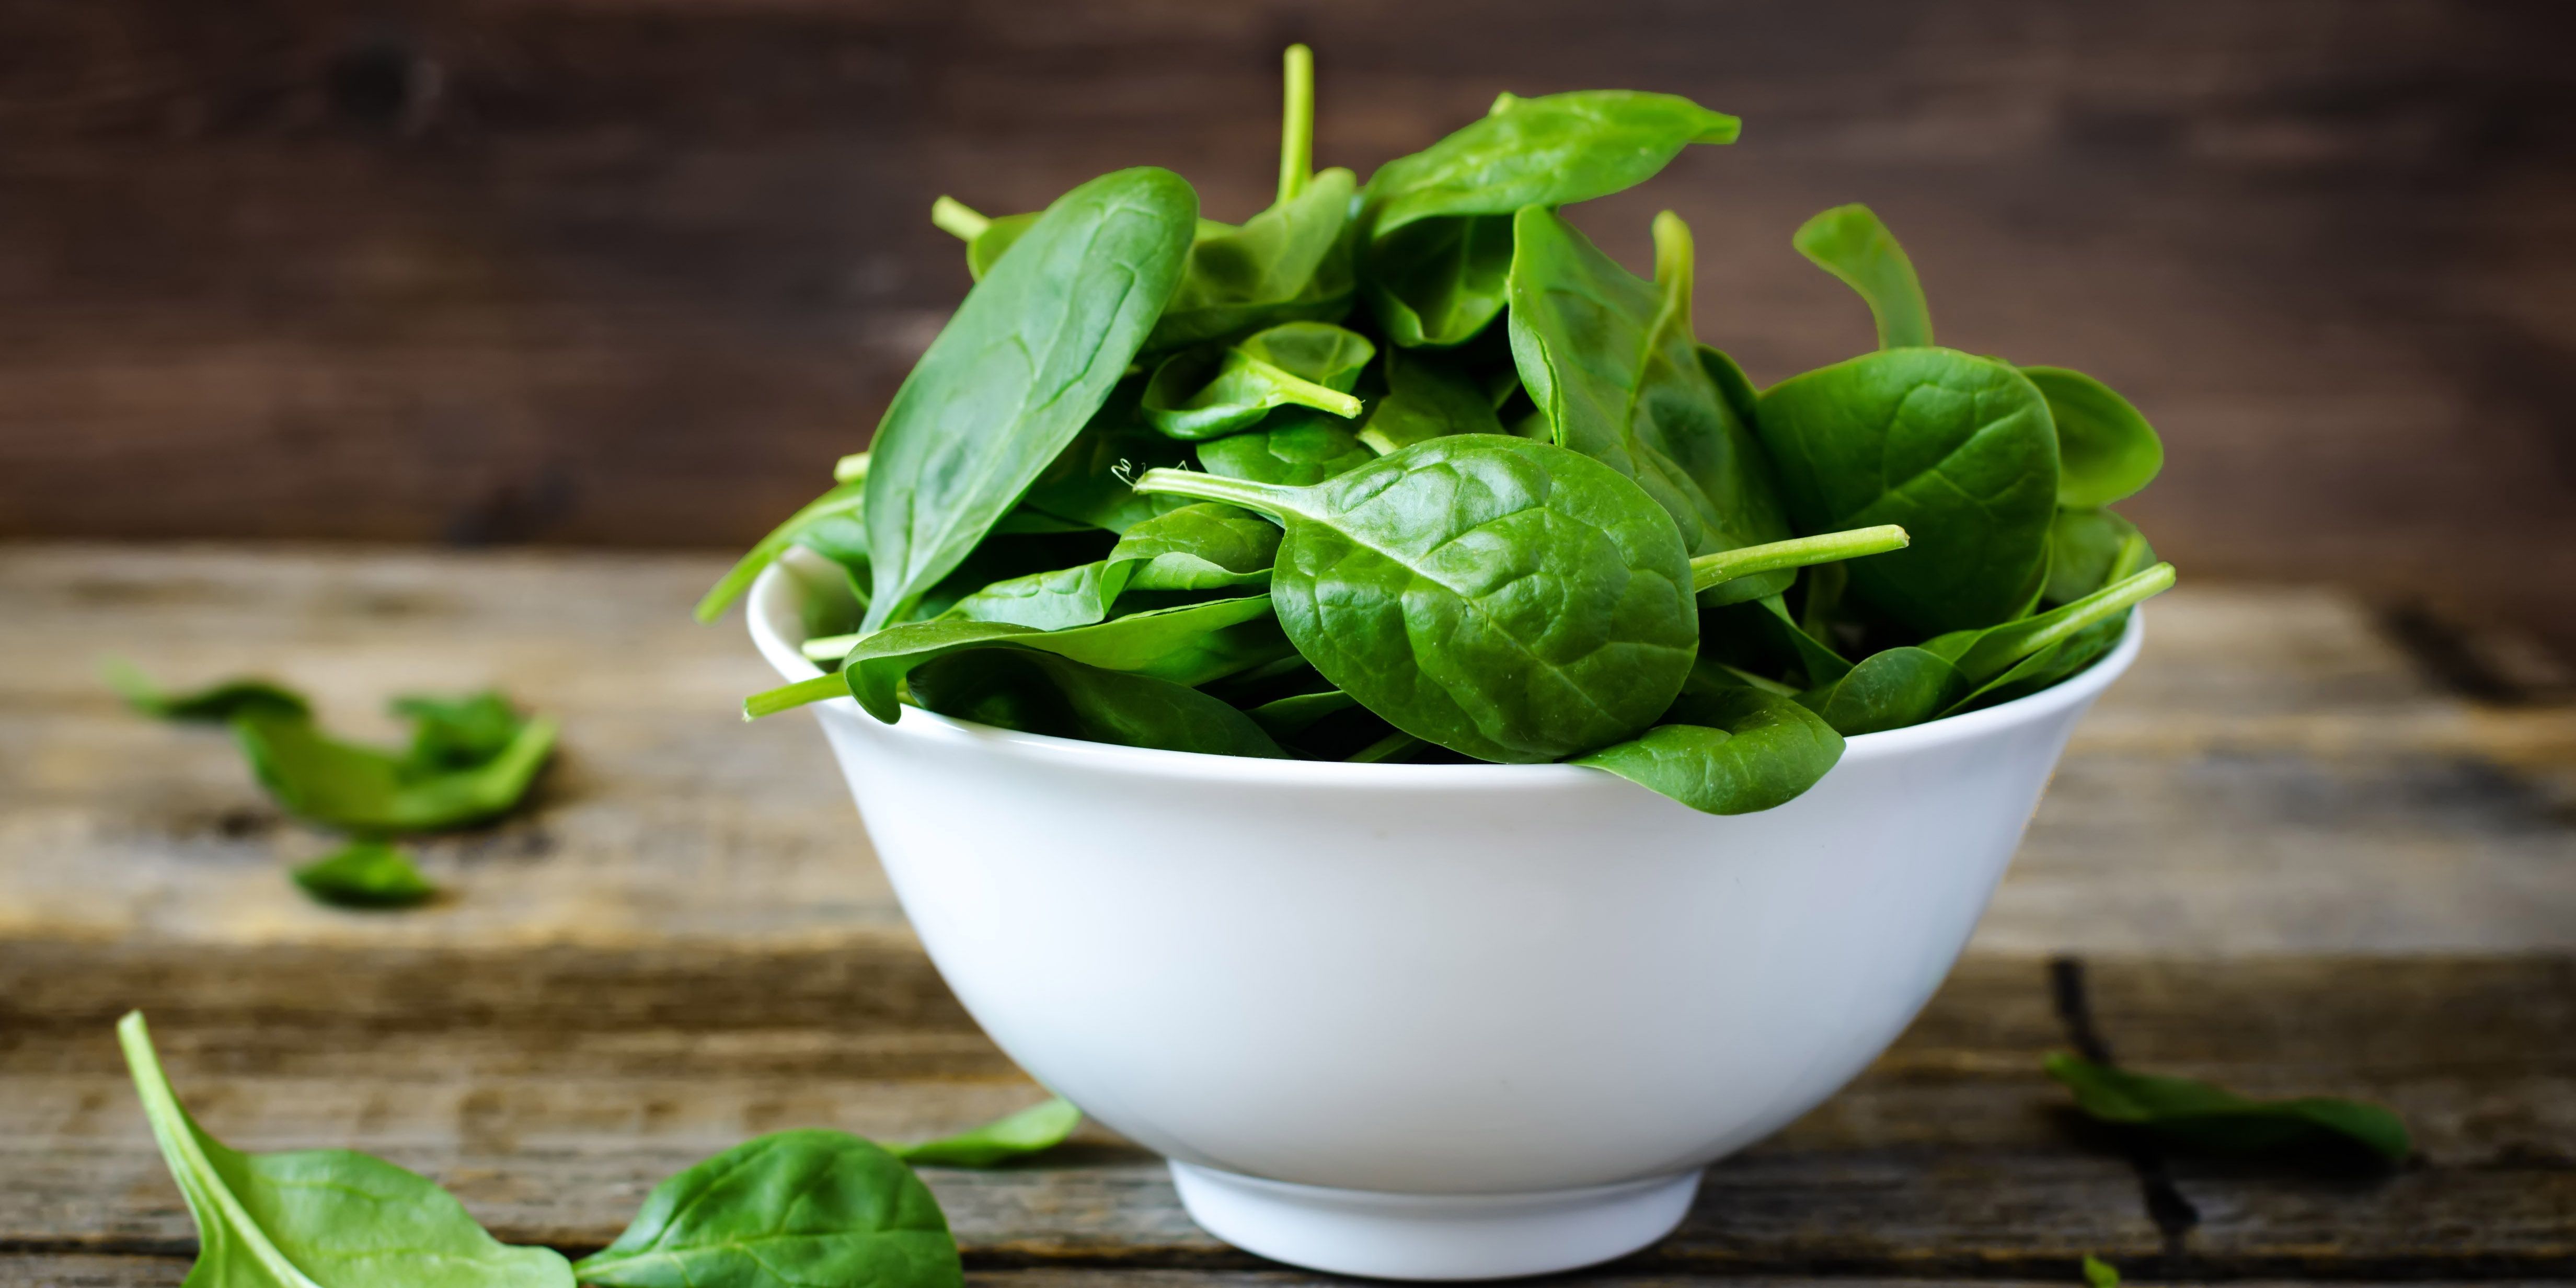 Spinach Nutrition - Cooked and Raw Spinach Nutrition Facts